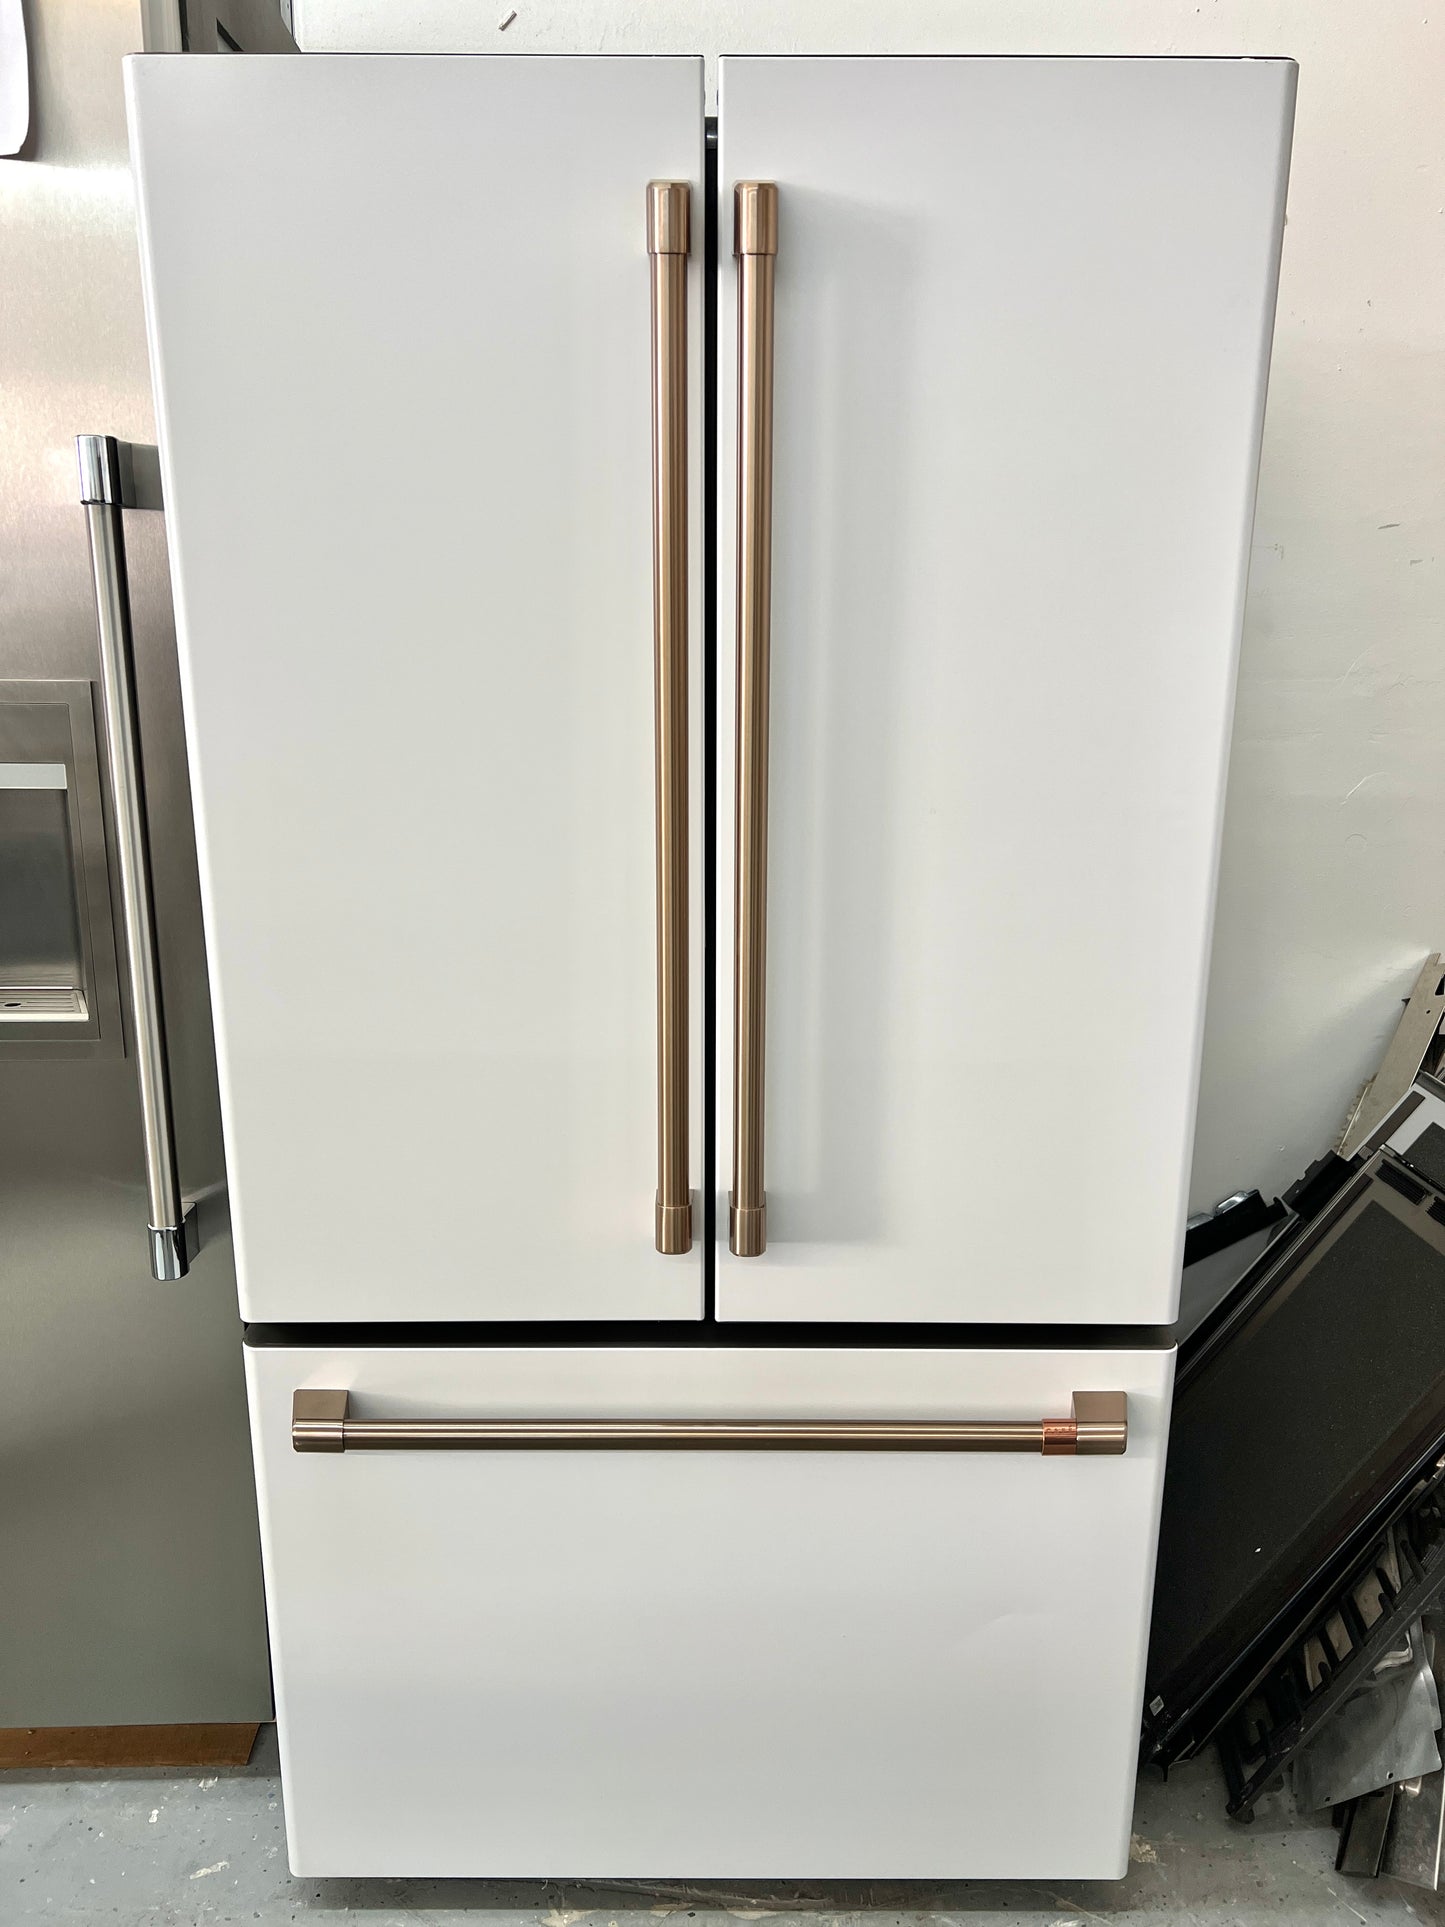 GE Cafe CWE23SP4MW2 36 Inch Counter Depth French Door Smart Refrigerator 23.1 Cu. Ft., TwinChill Evaporators,, Wi-Fi, Water Ice, ENERGY STAR, Matte White Brushed Bronze Handles , 369394